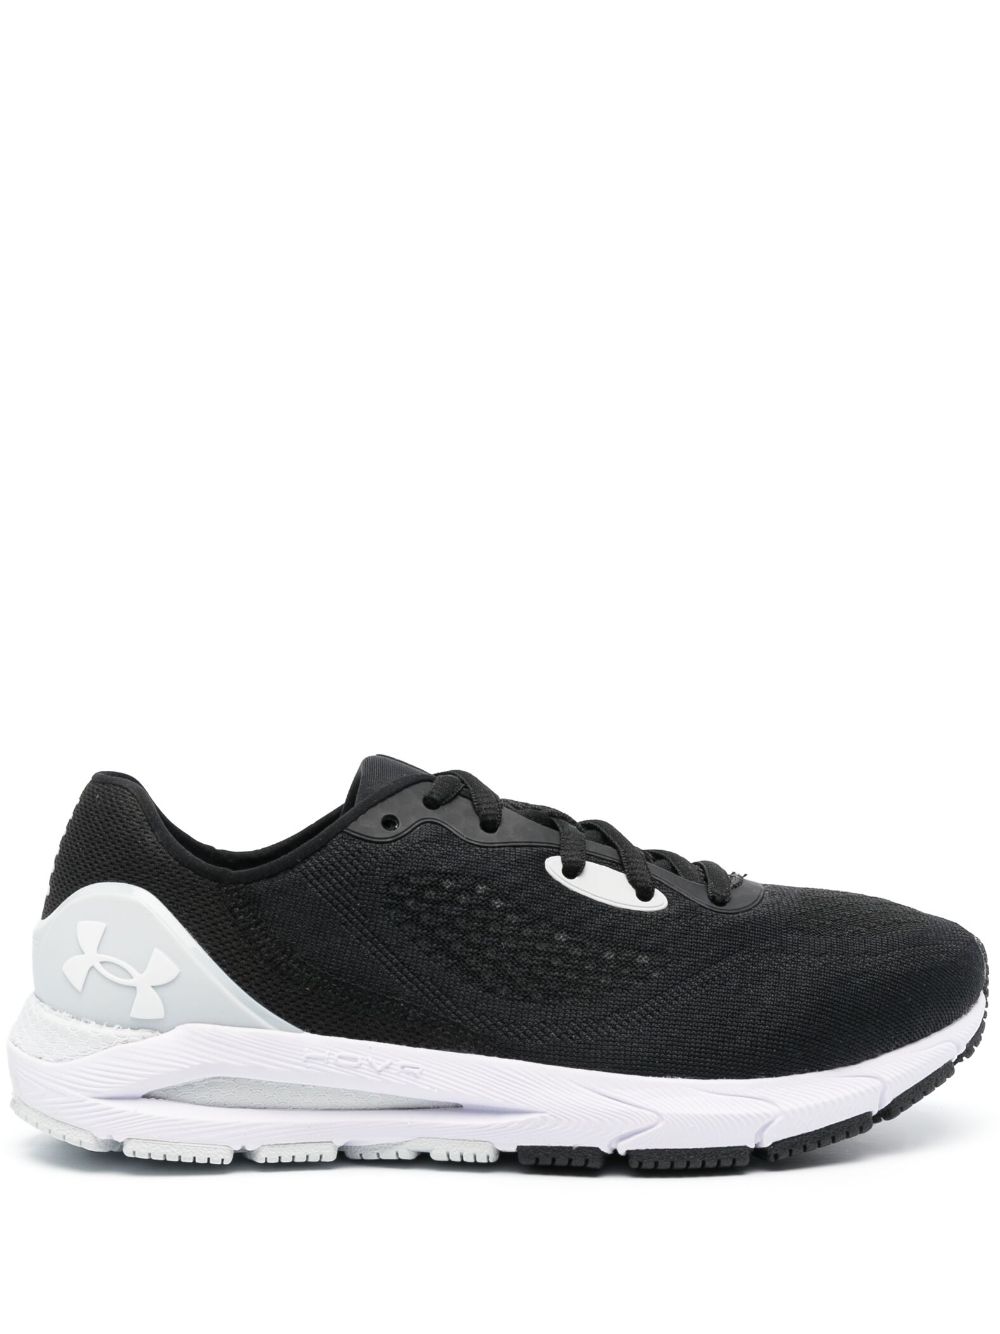 Under Armour round-toe lace-up sneakers - Black von Under Armour